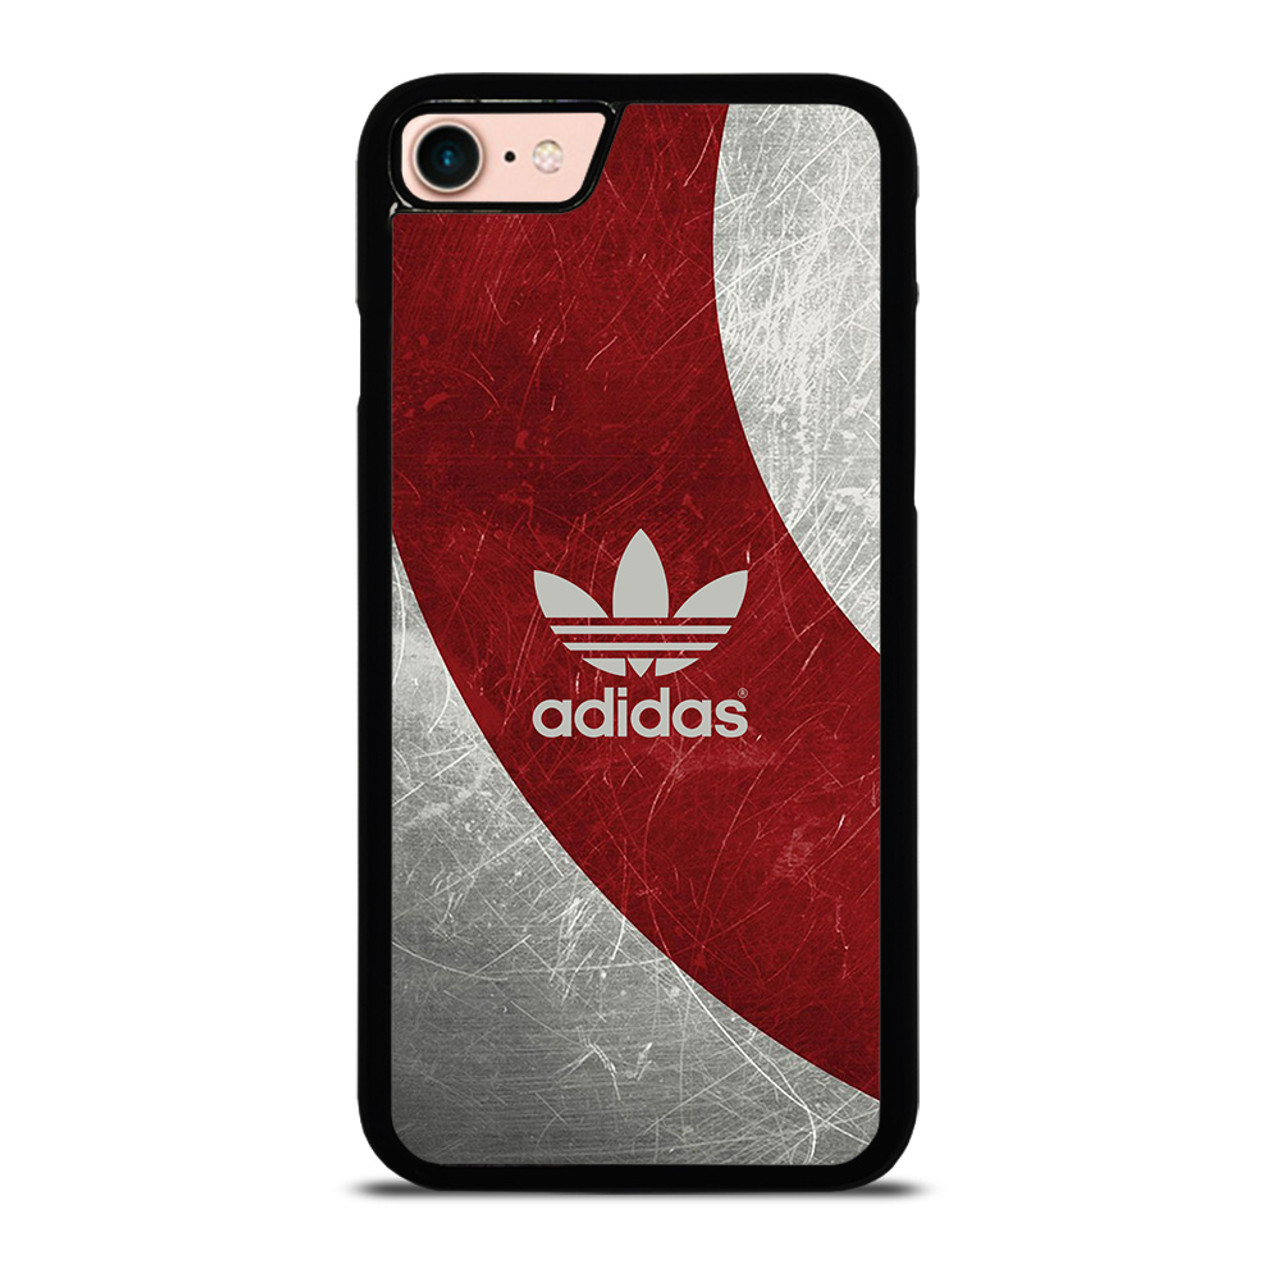 ADIDAS RED GRUNGE TEXTURE LOGO iPhone 8 Cover